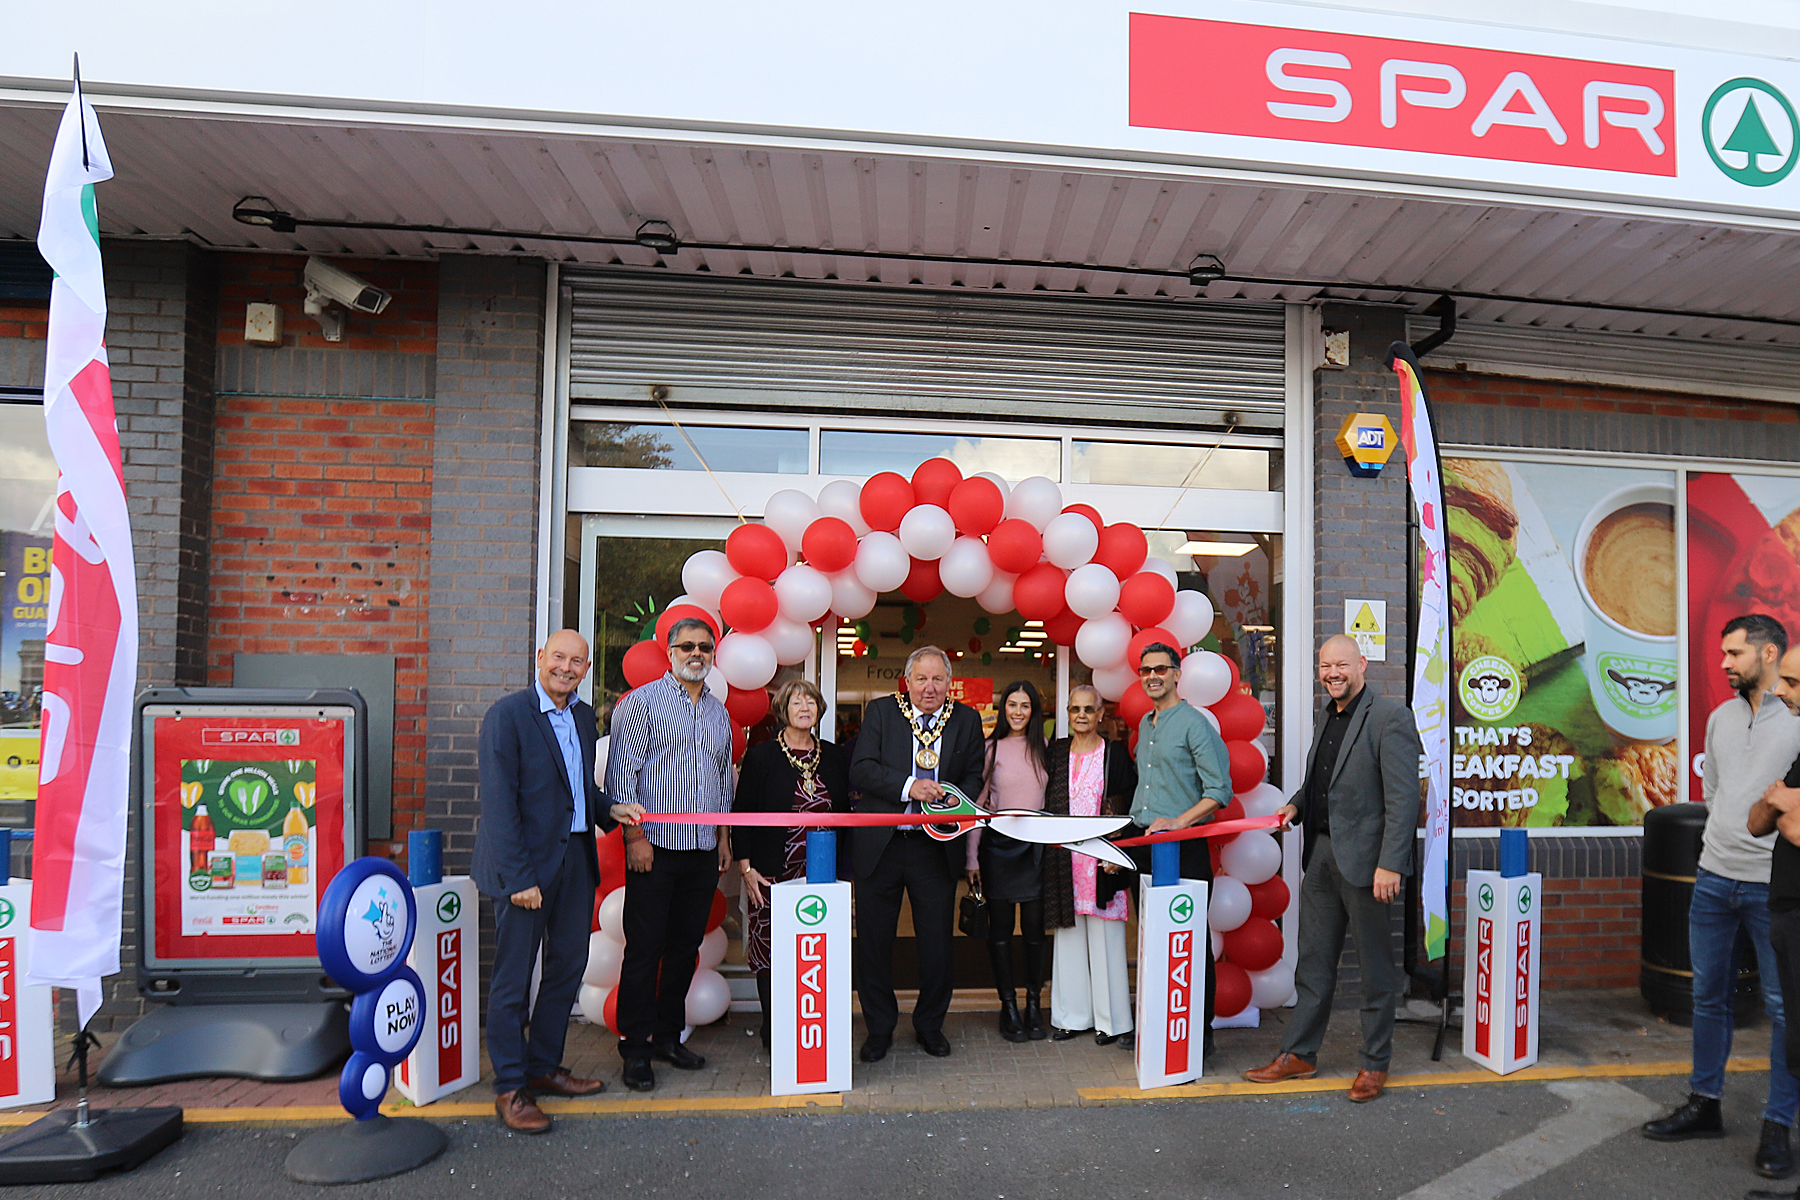 The launch of SPAR Uppal Rochdale